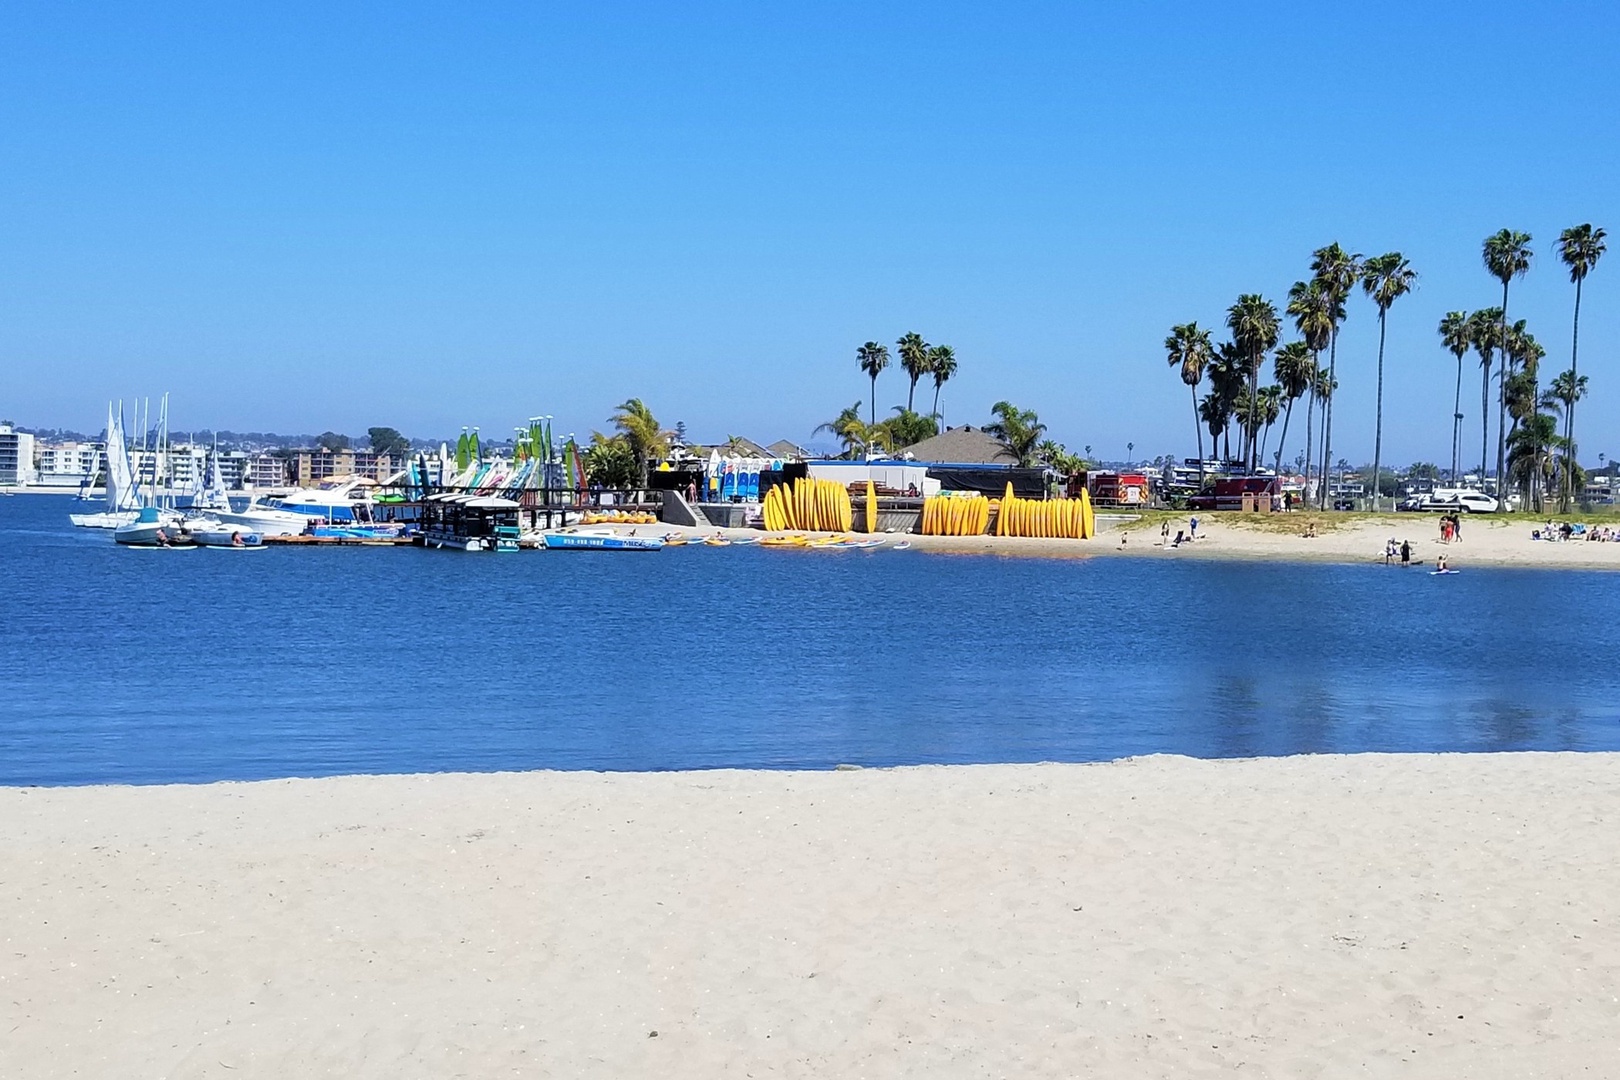 Nearby Mission Bay Aquatic Center